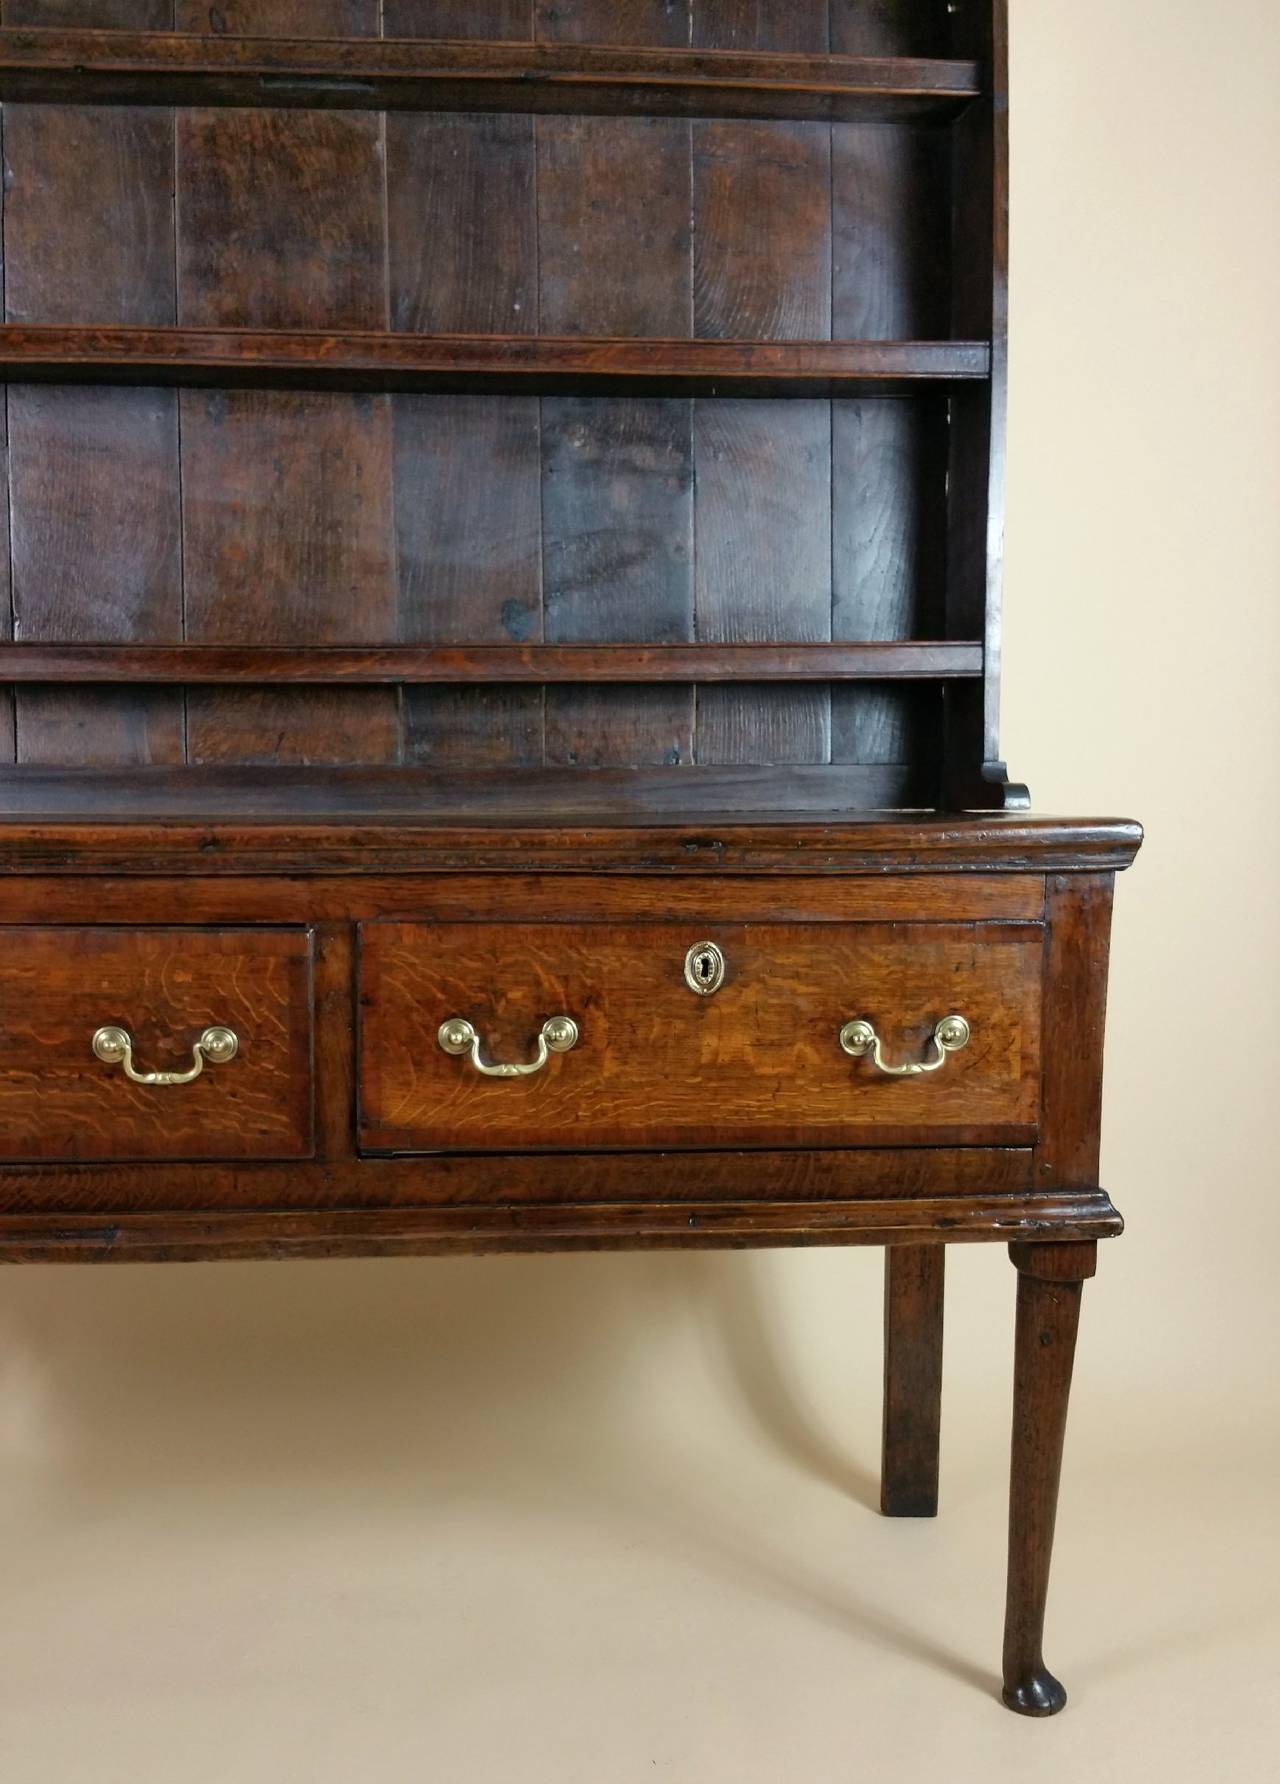 This gorgeous and superb quality oak cottage dresser is circa 1750, and features crossbanded mahogany decoration against a beautiful and rich patina. The dresser has three shelves with two spacious full length top drawers, with tapered front legs on